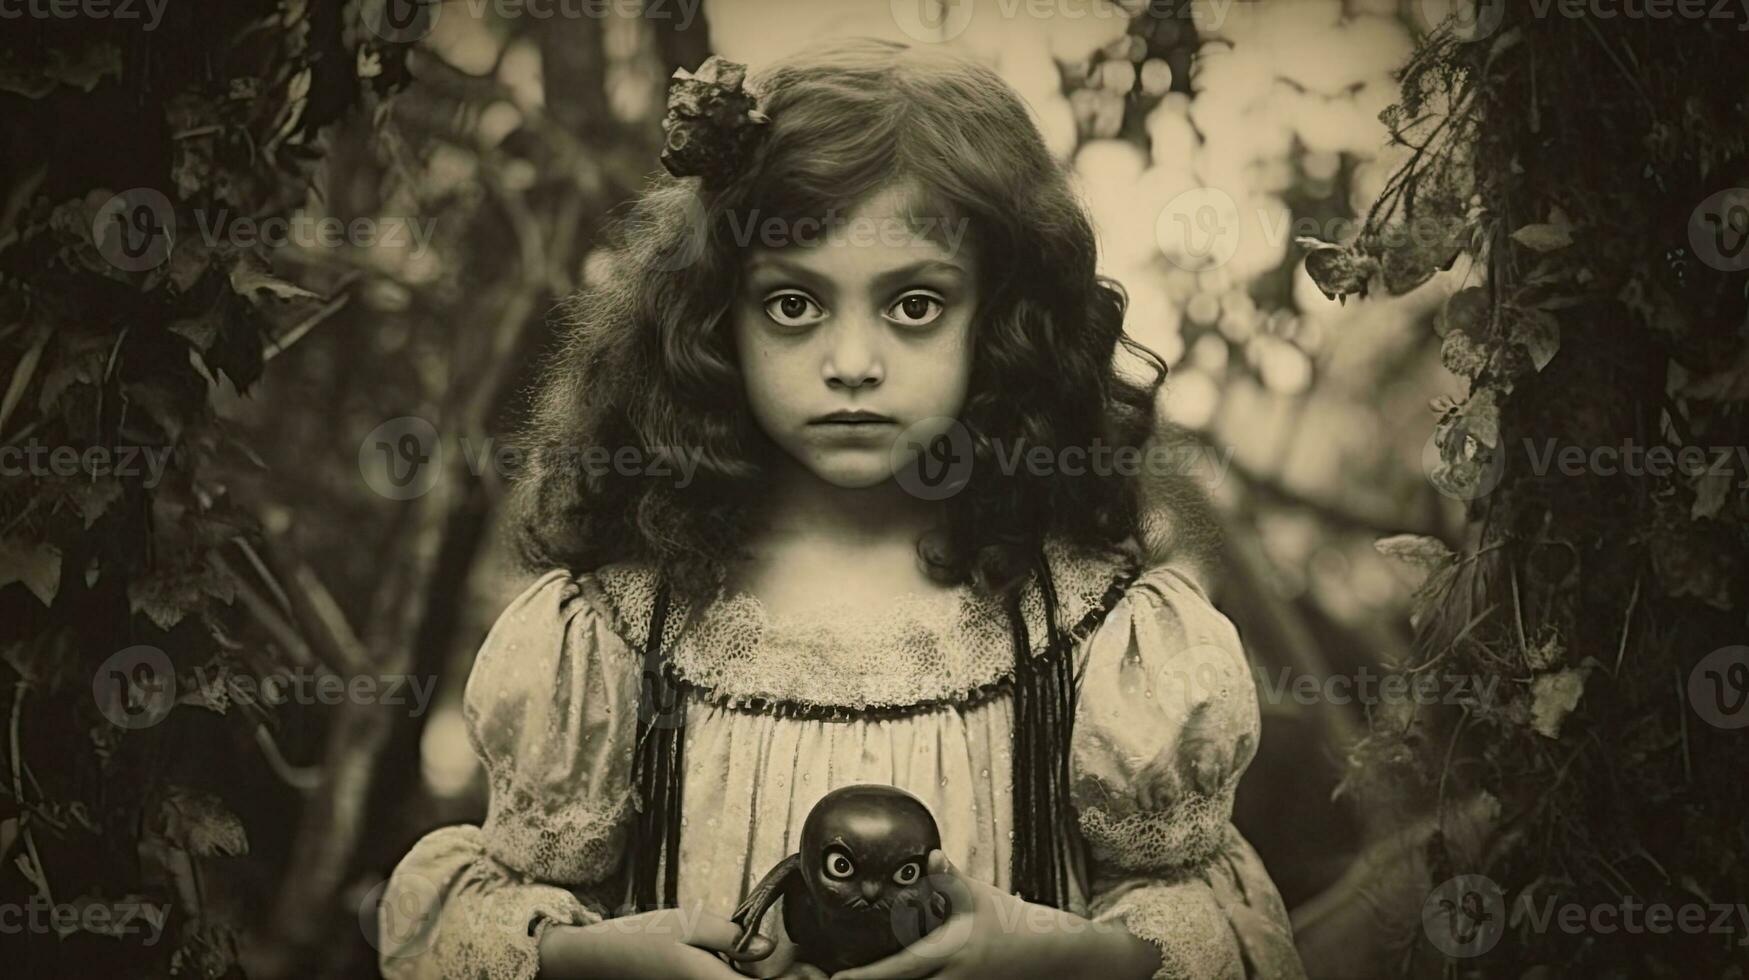 children kids halloween scary vintage photography masks 19th century horror costumes party photo